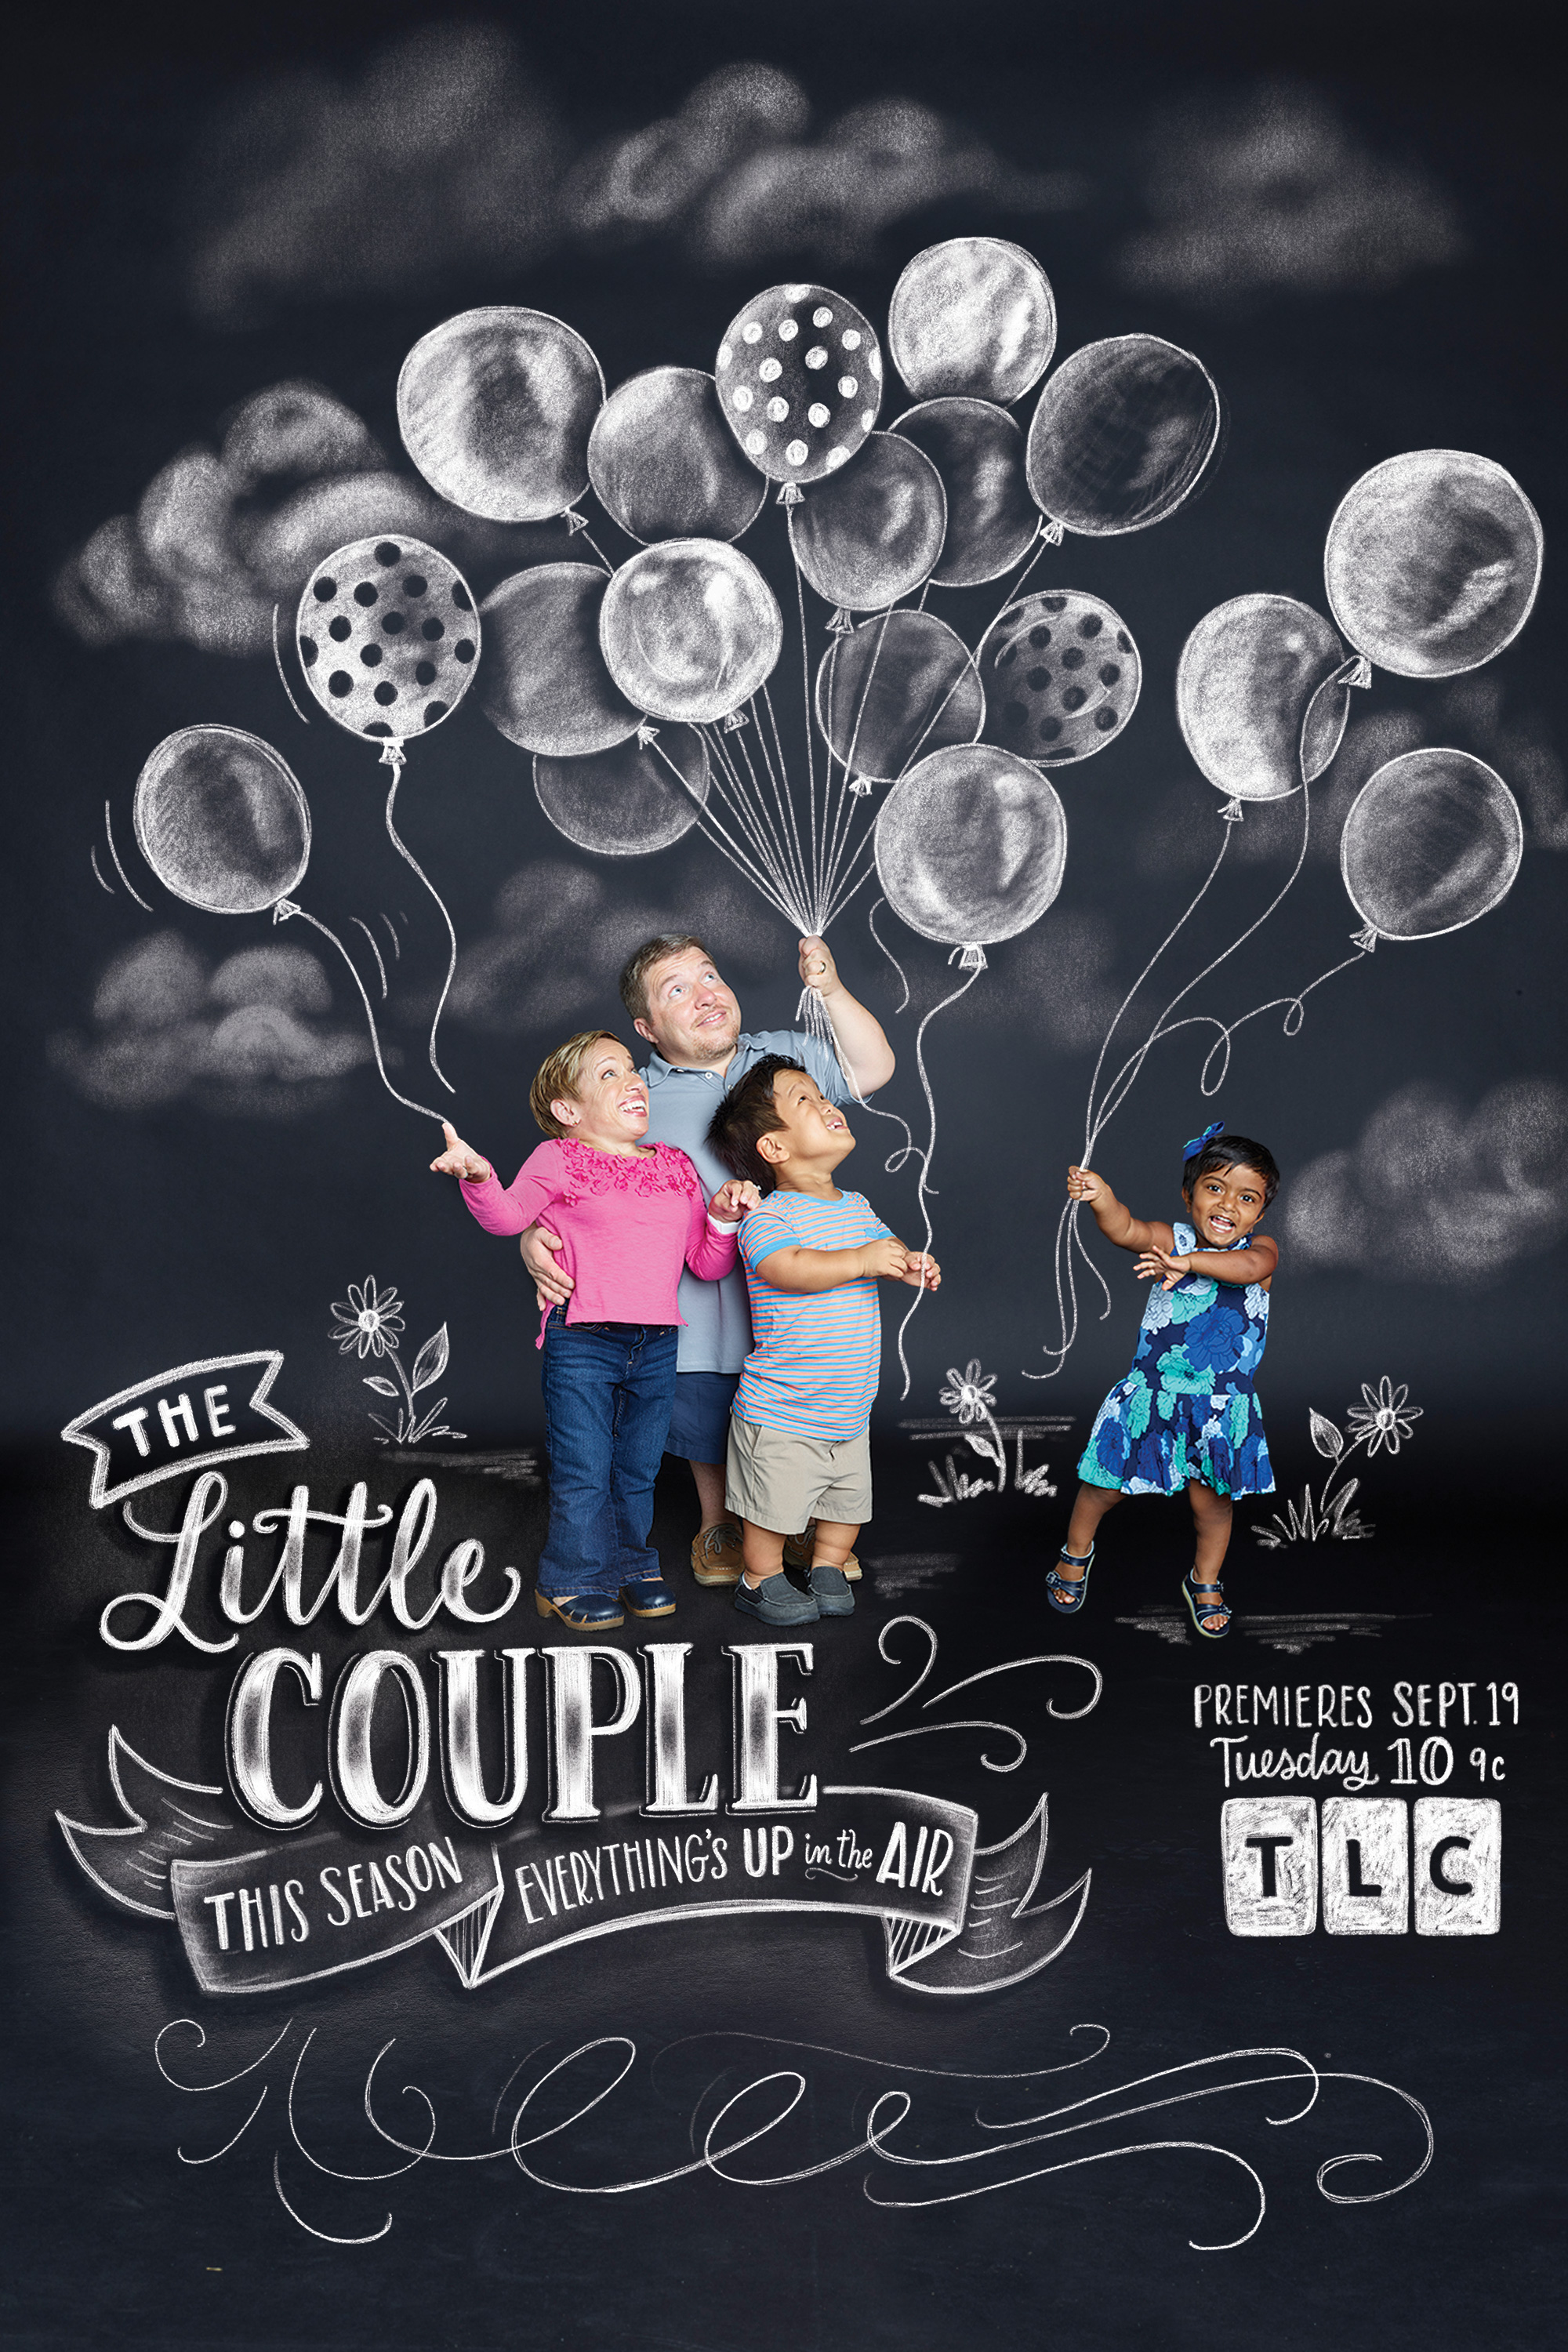 Lily & Val chalk art for the Little Couple on TLC